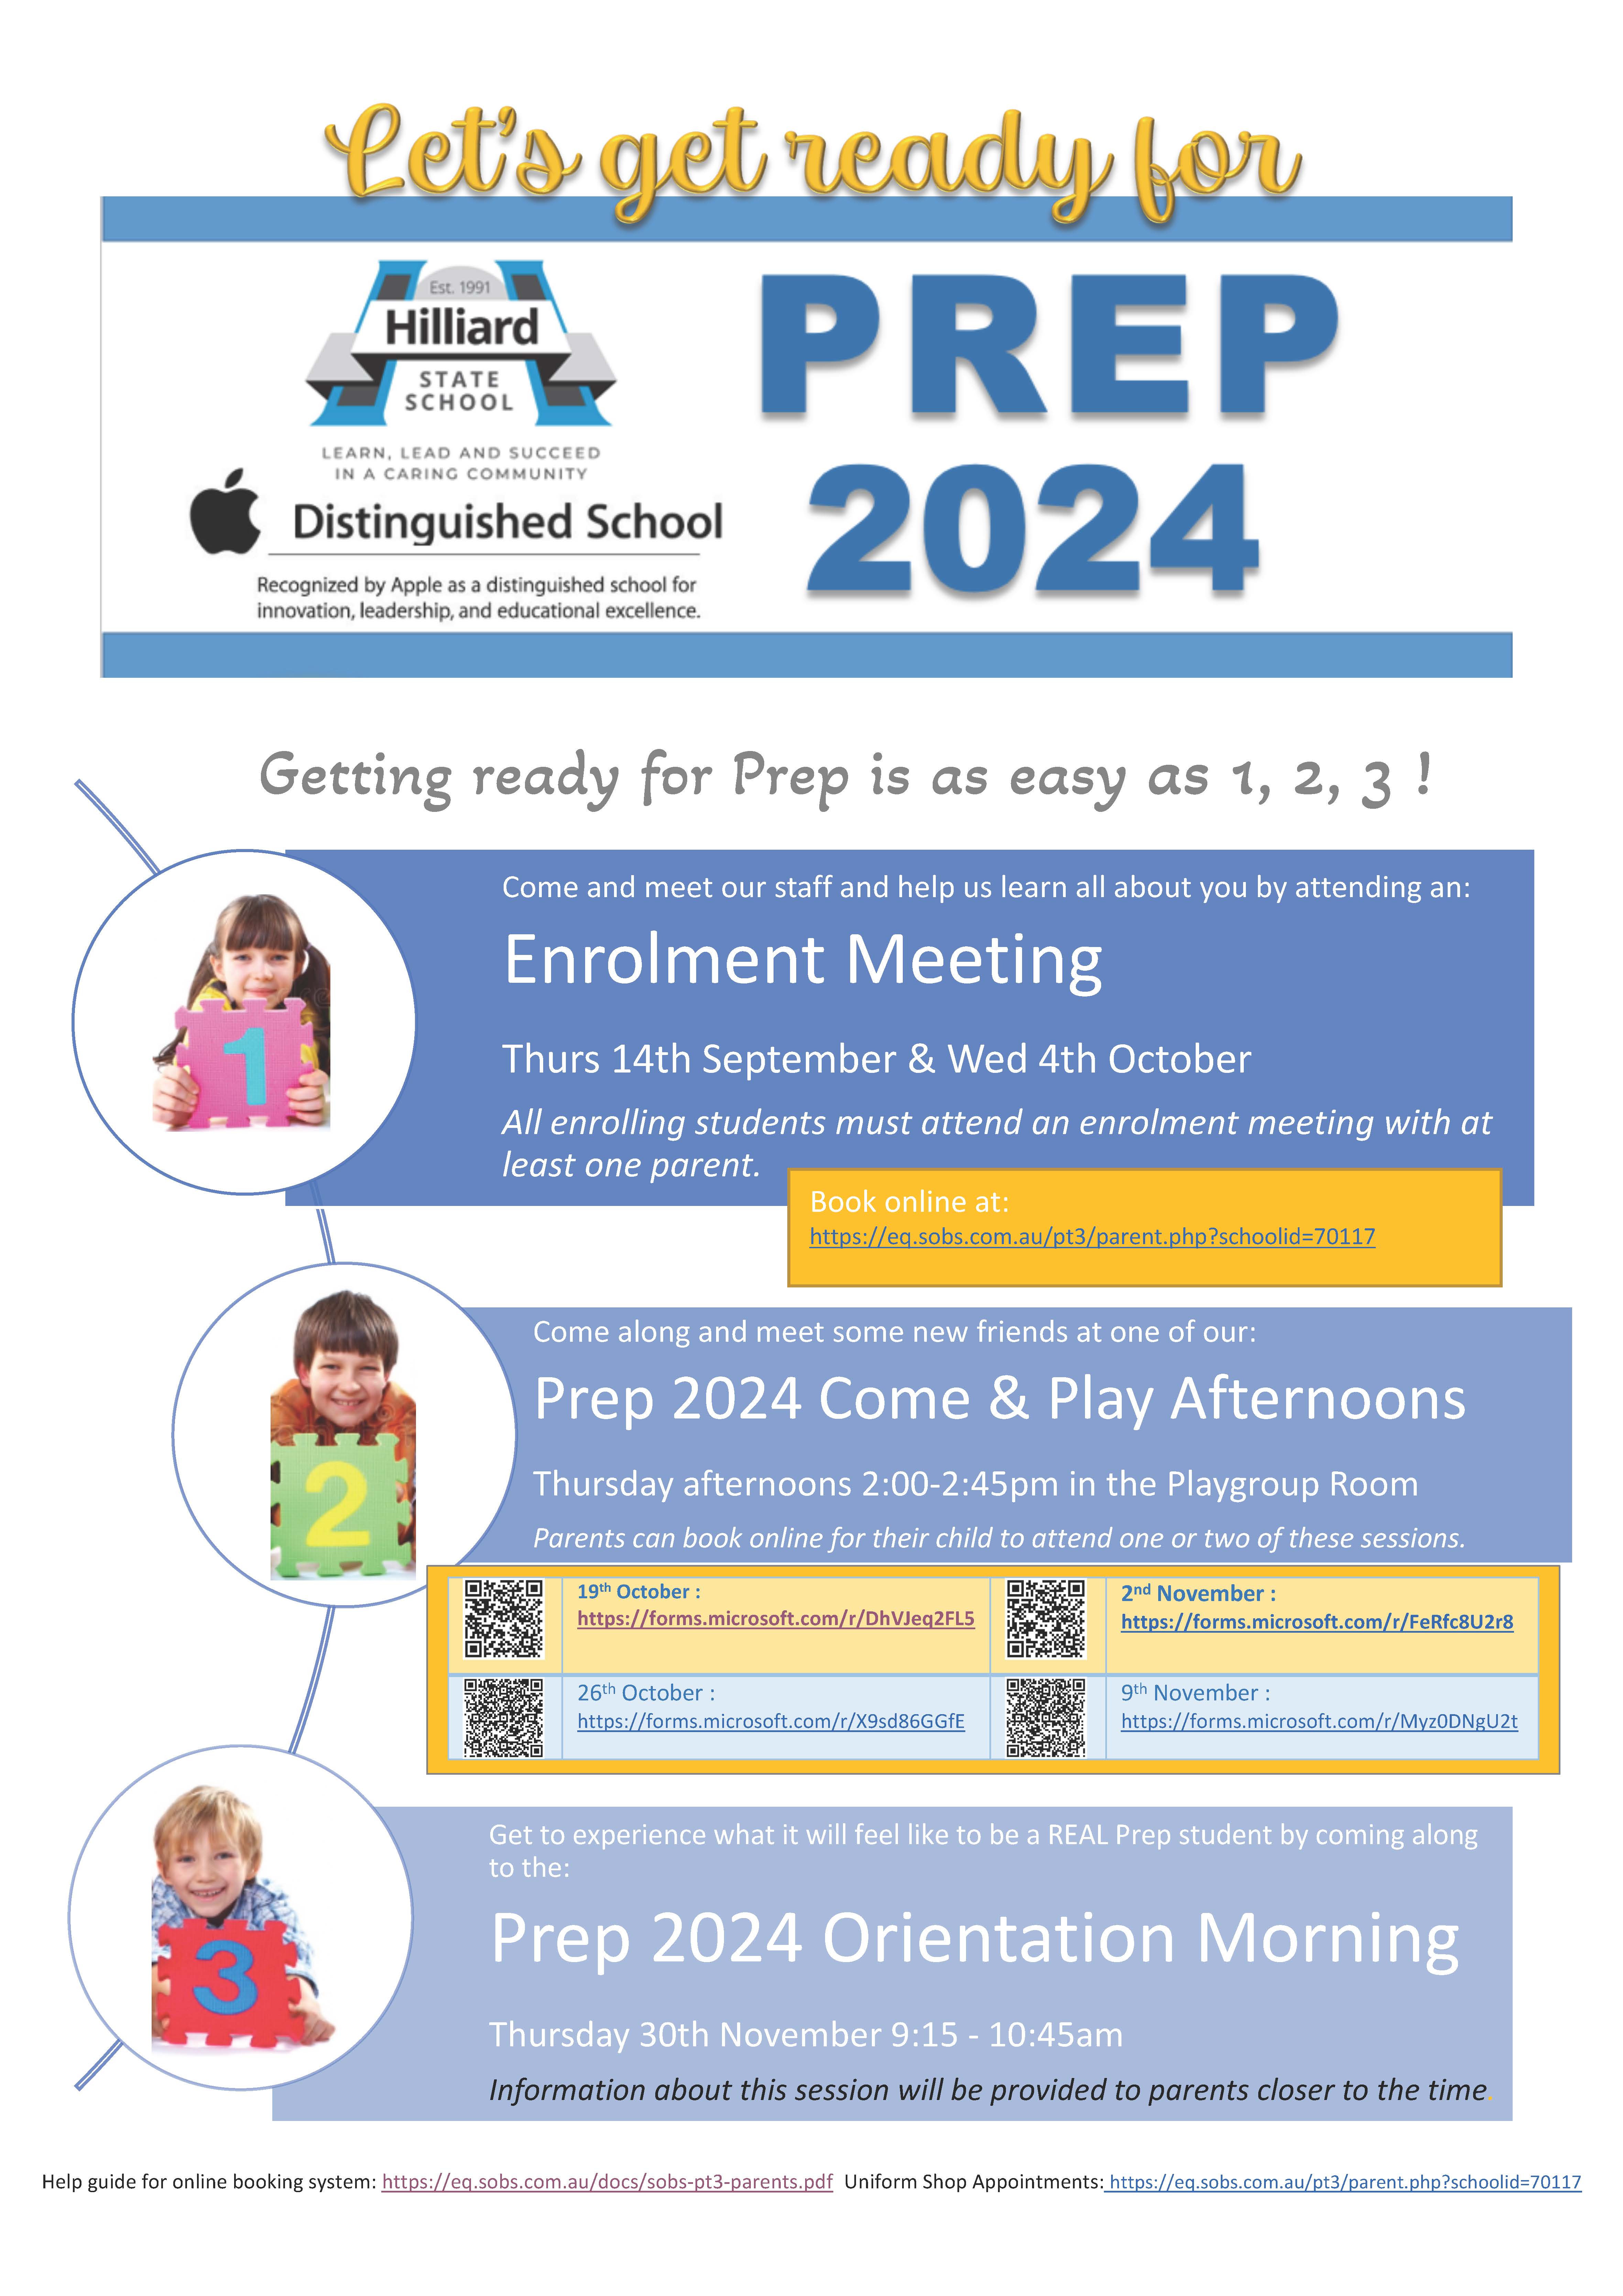 Getting ready for Prep 2024 is as easy as 1.jpg